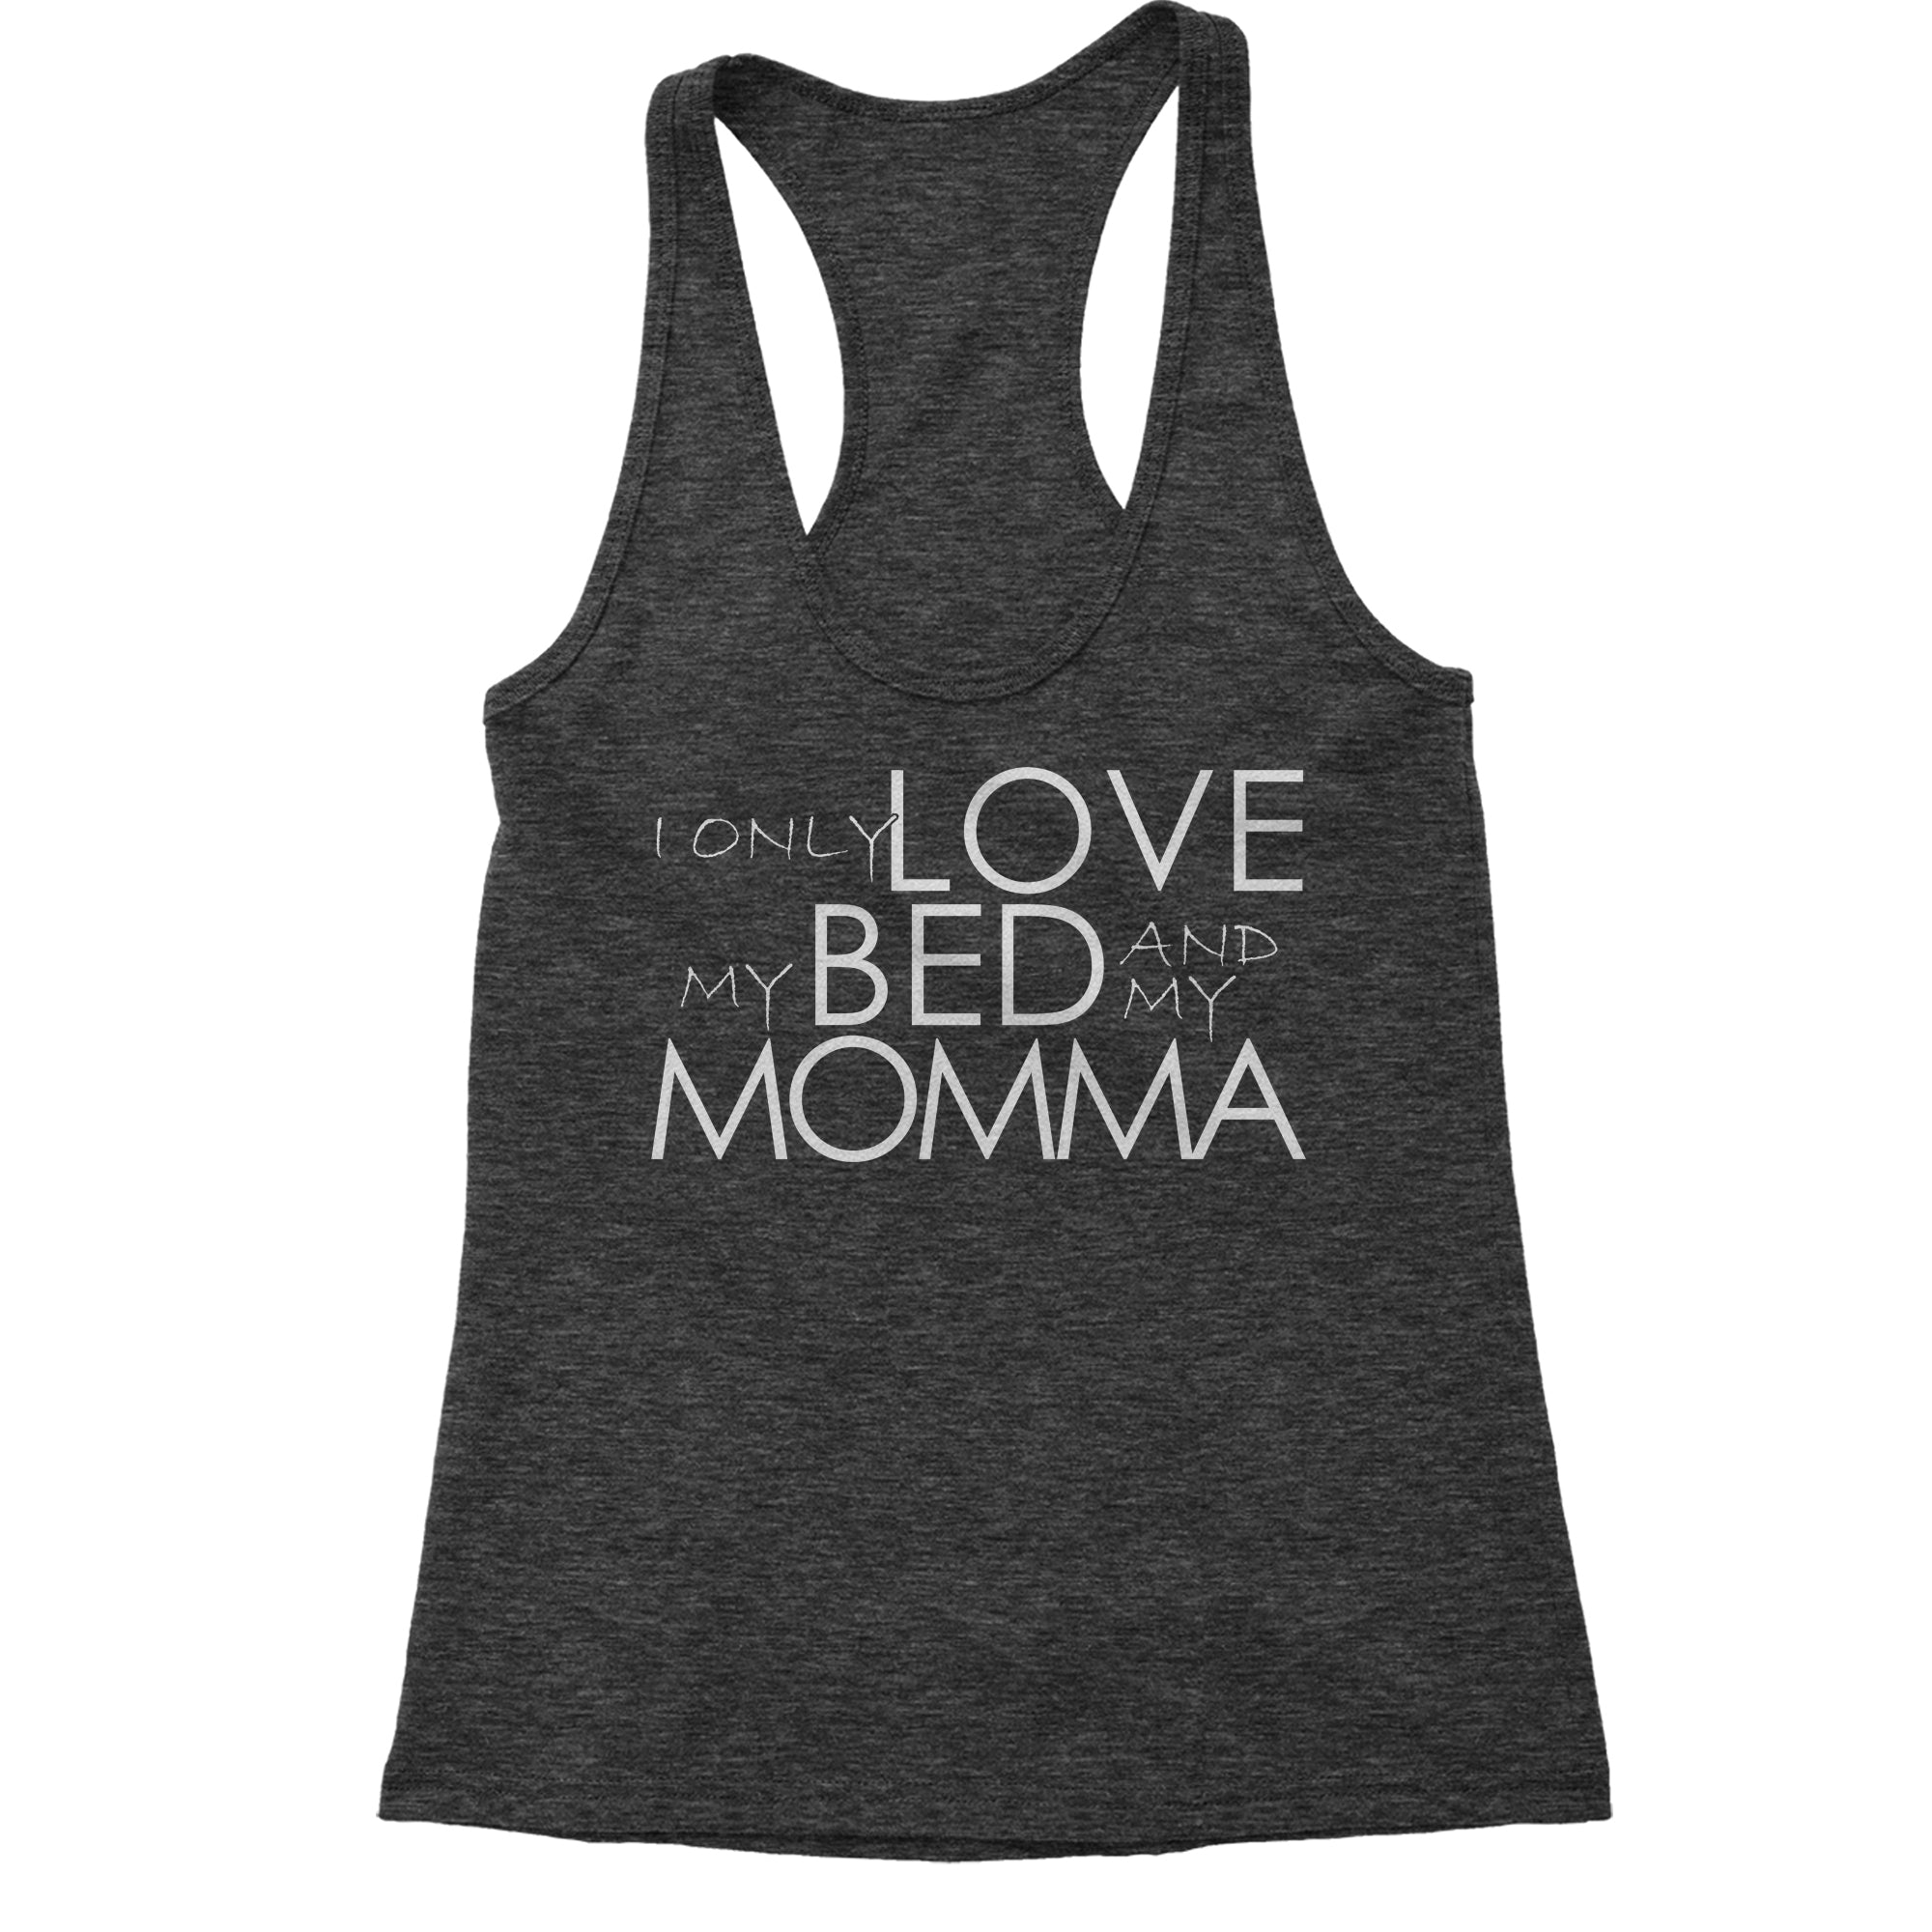 I Only Love My Bed And My Momma Women's Racerback Tank